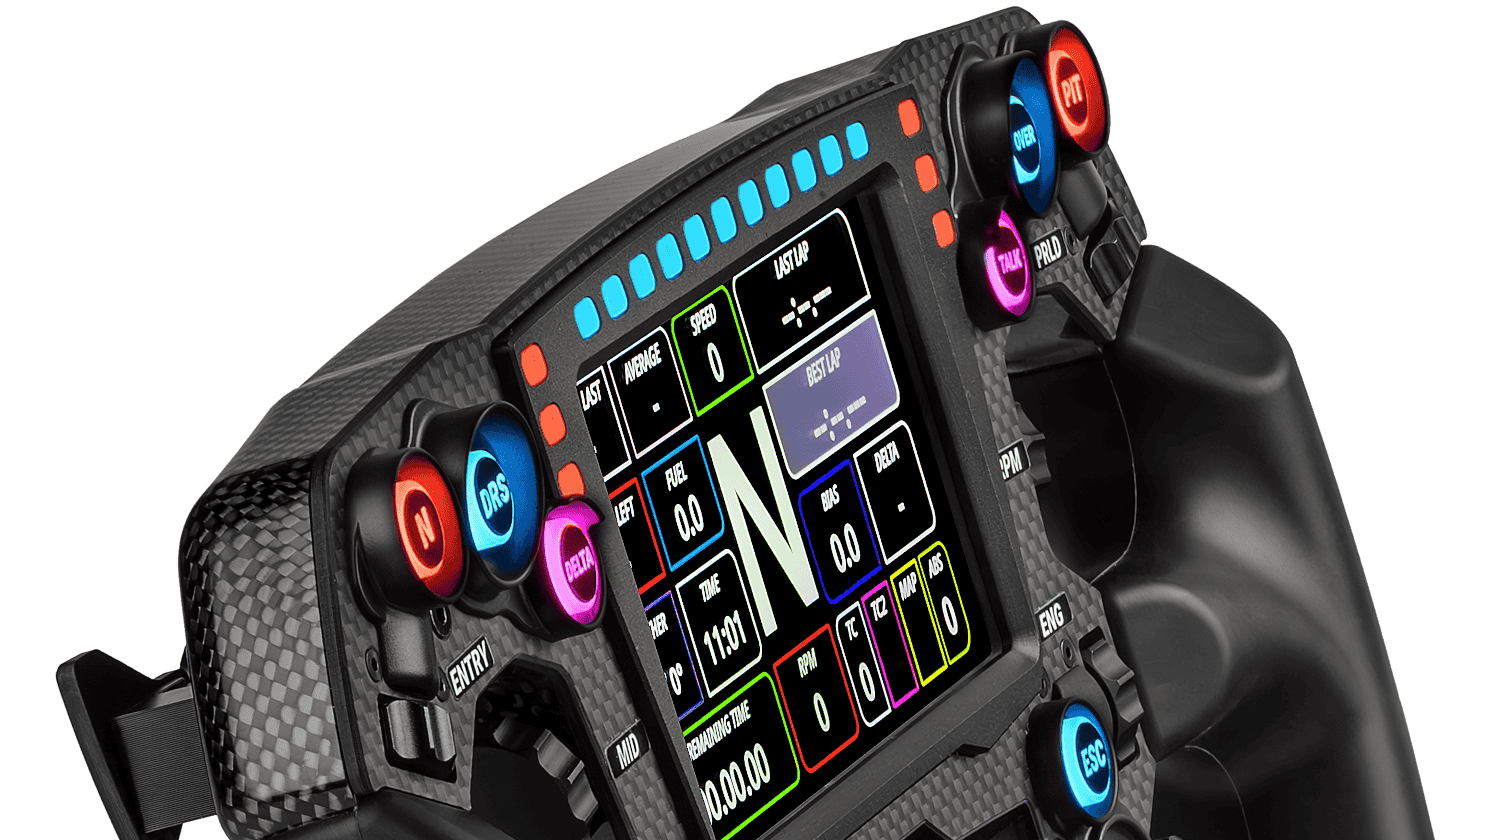 product_picture_REXING LAUNCHES NEW MAYARIS 2 STEERING WHEEL FEATURING 3 OLED STICKER SCREENS